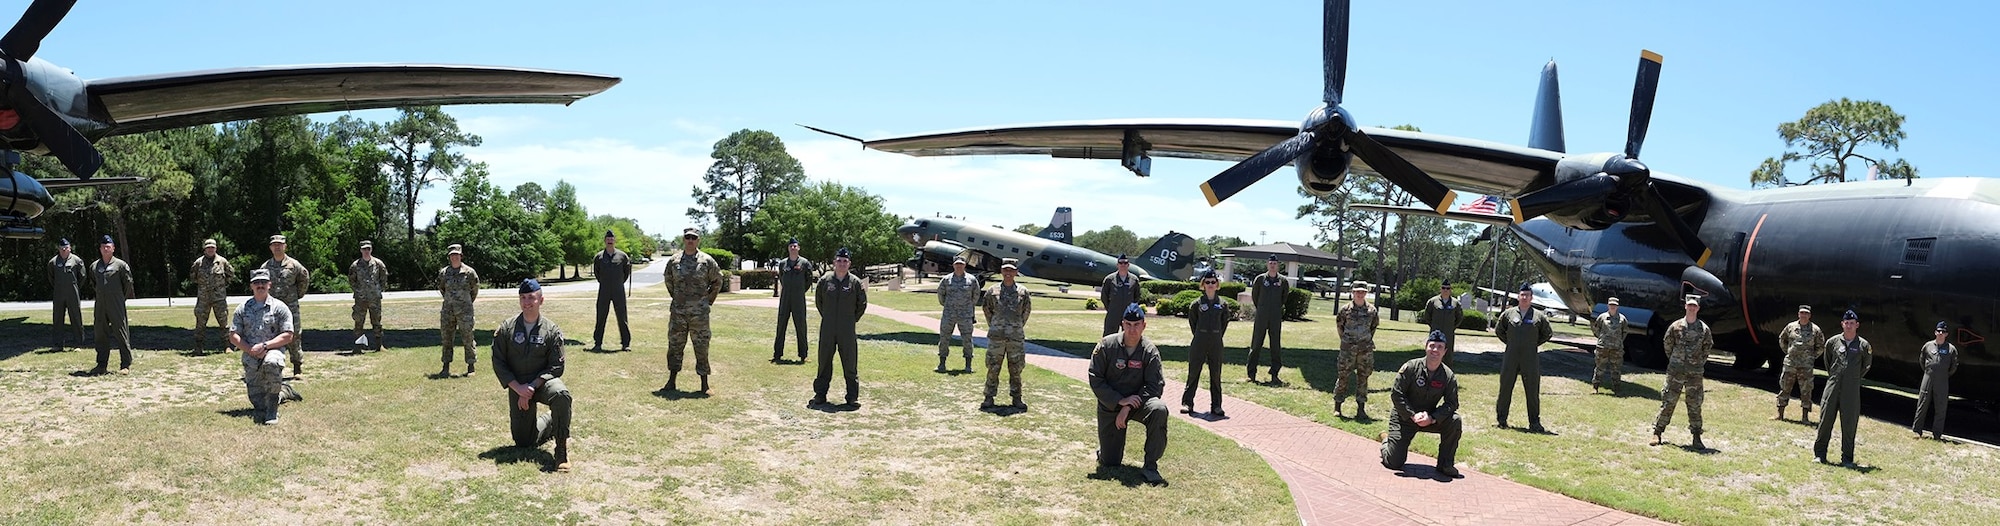 27 Multi-Domain Warfare Officer Students pose for group photo with social distancing at the Hurlburt Field Air Park, Florida.